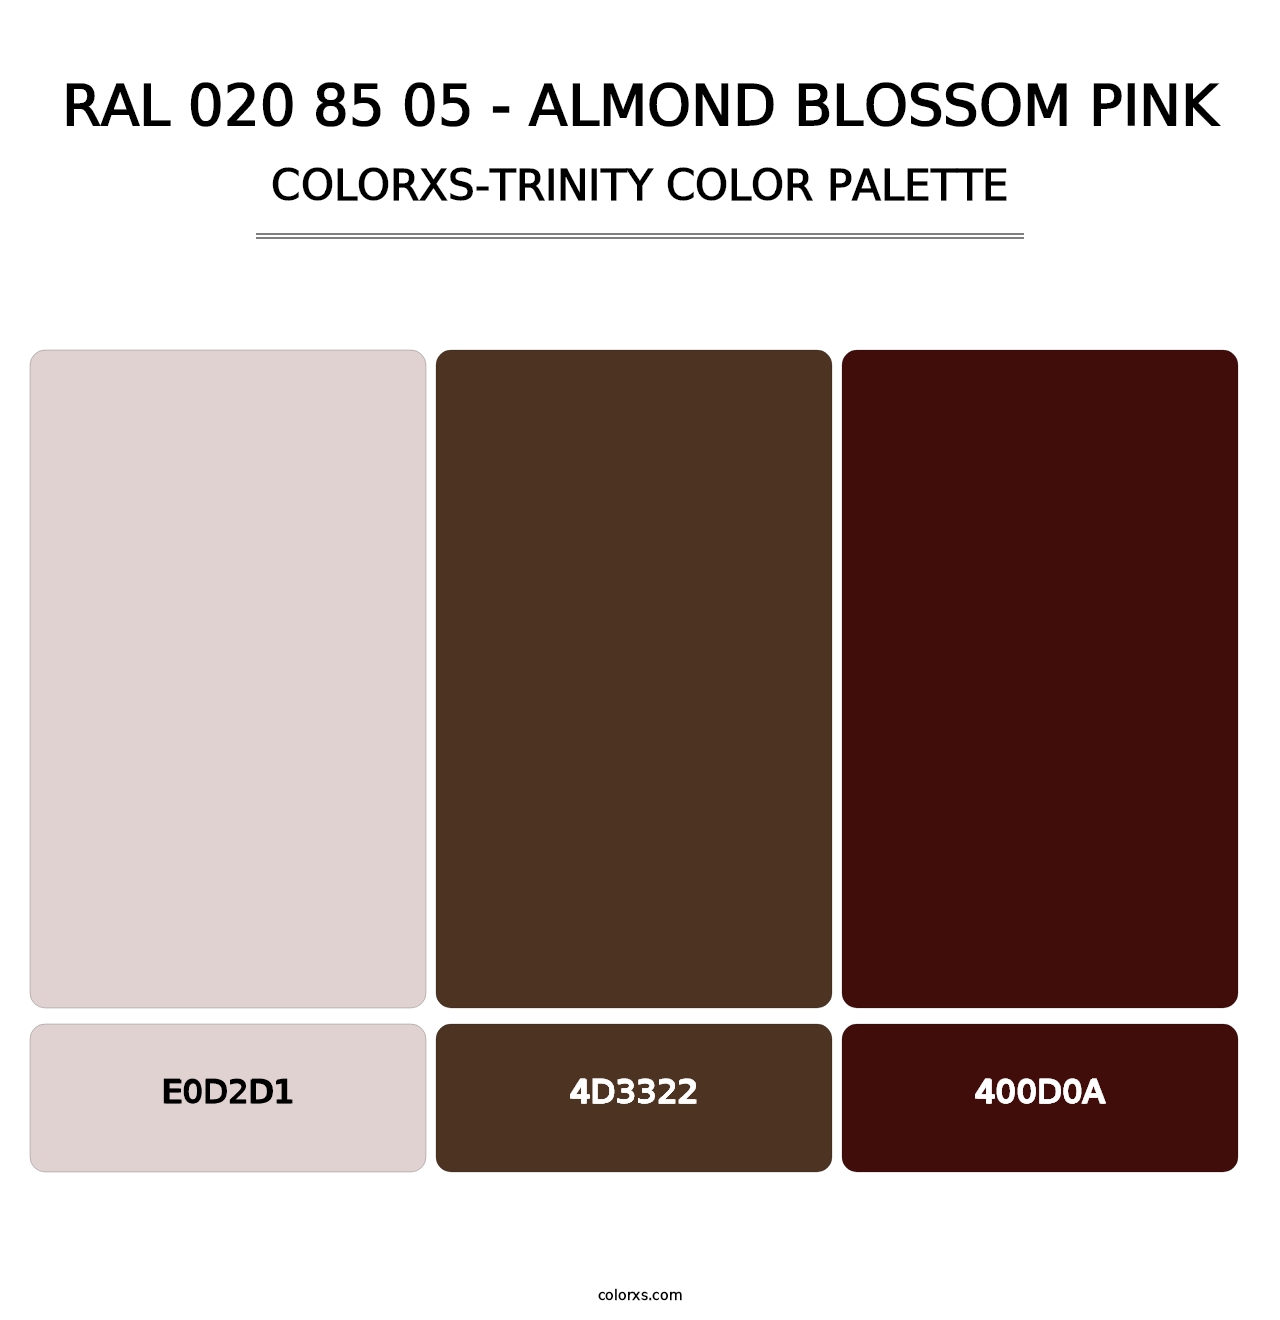 RAL 020 85 05 - Almond Blossom Pink - Colorxs Trinity Palette